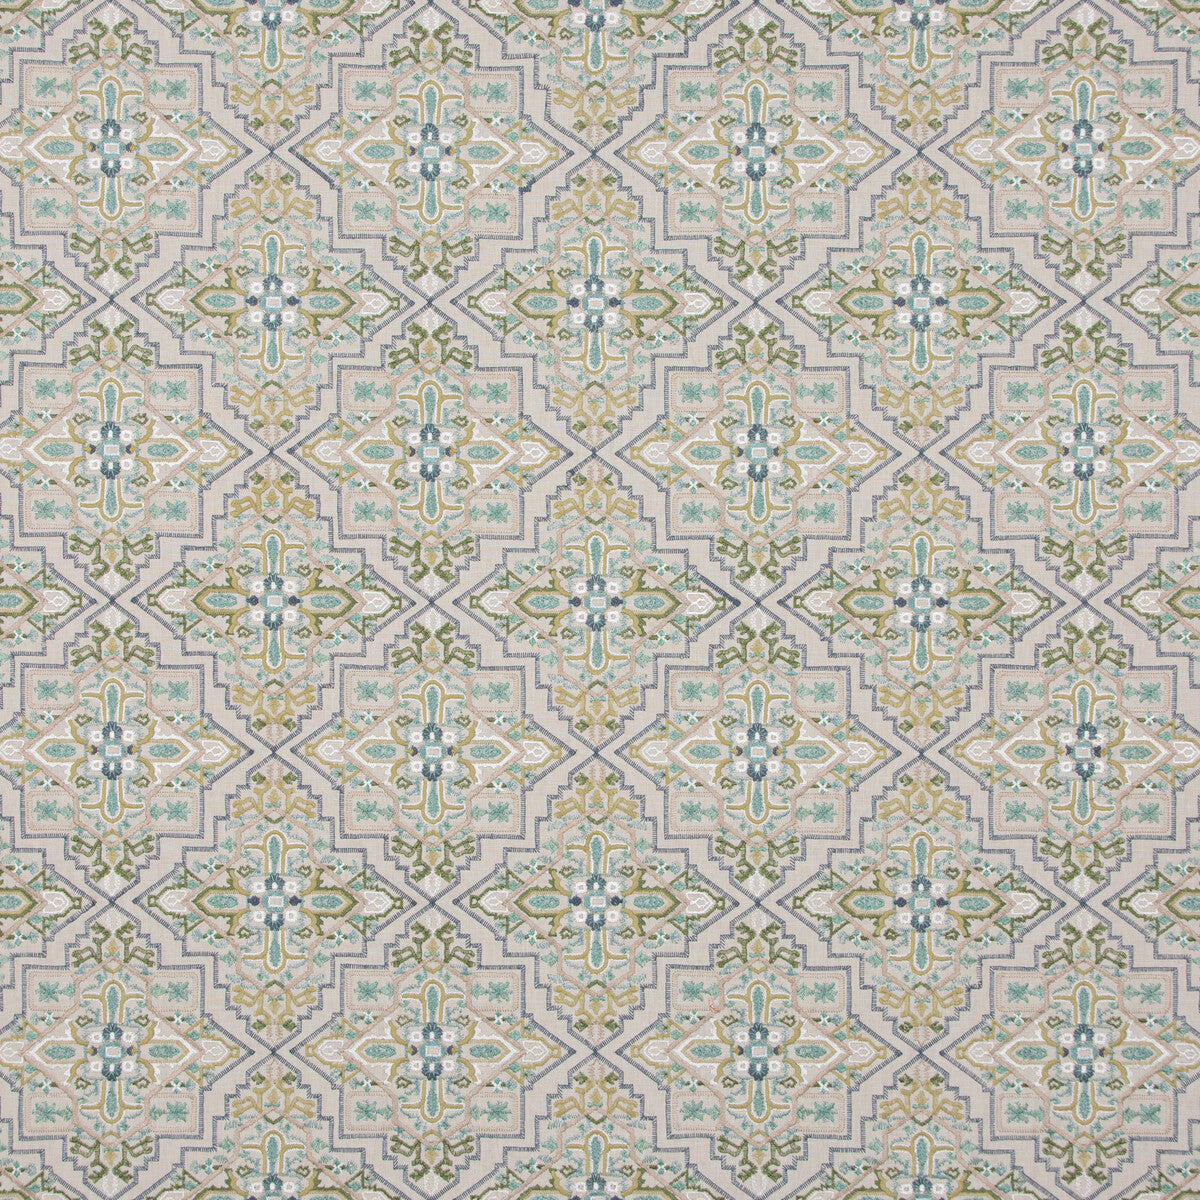 Benaki fabric in aqua color - pattern BF10940.1.0 - by G P &amp; J Baker in the Caspian collection